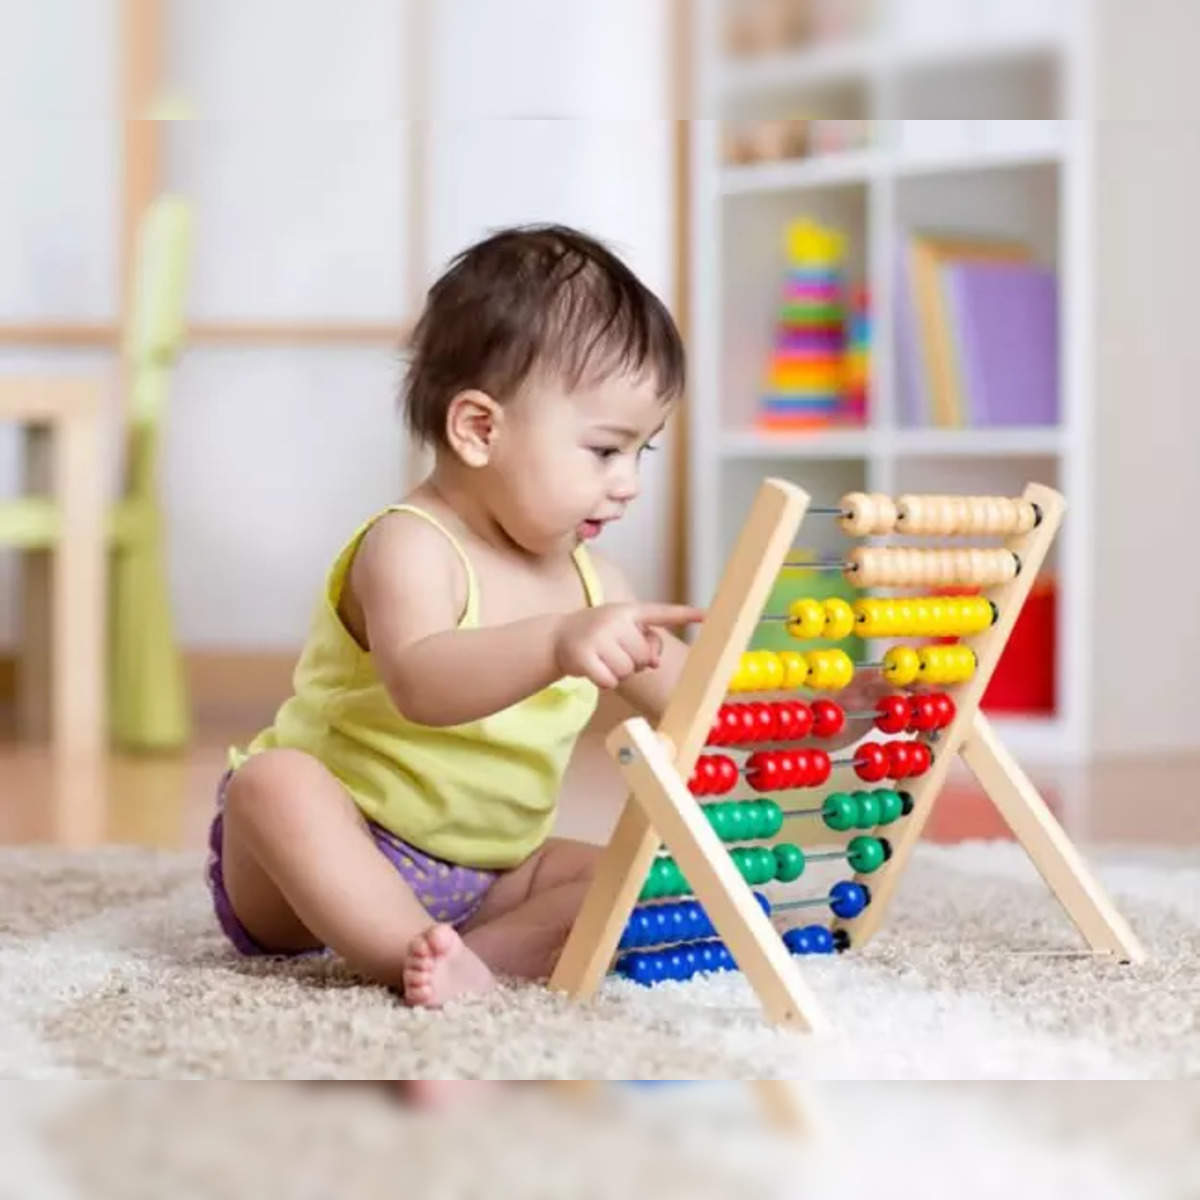 Educational Toys for Kids: Best Educational Toys for Kids in India to  Kickstart their Learning Journey - The Economic Times